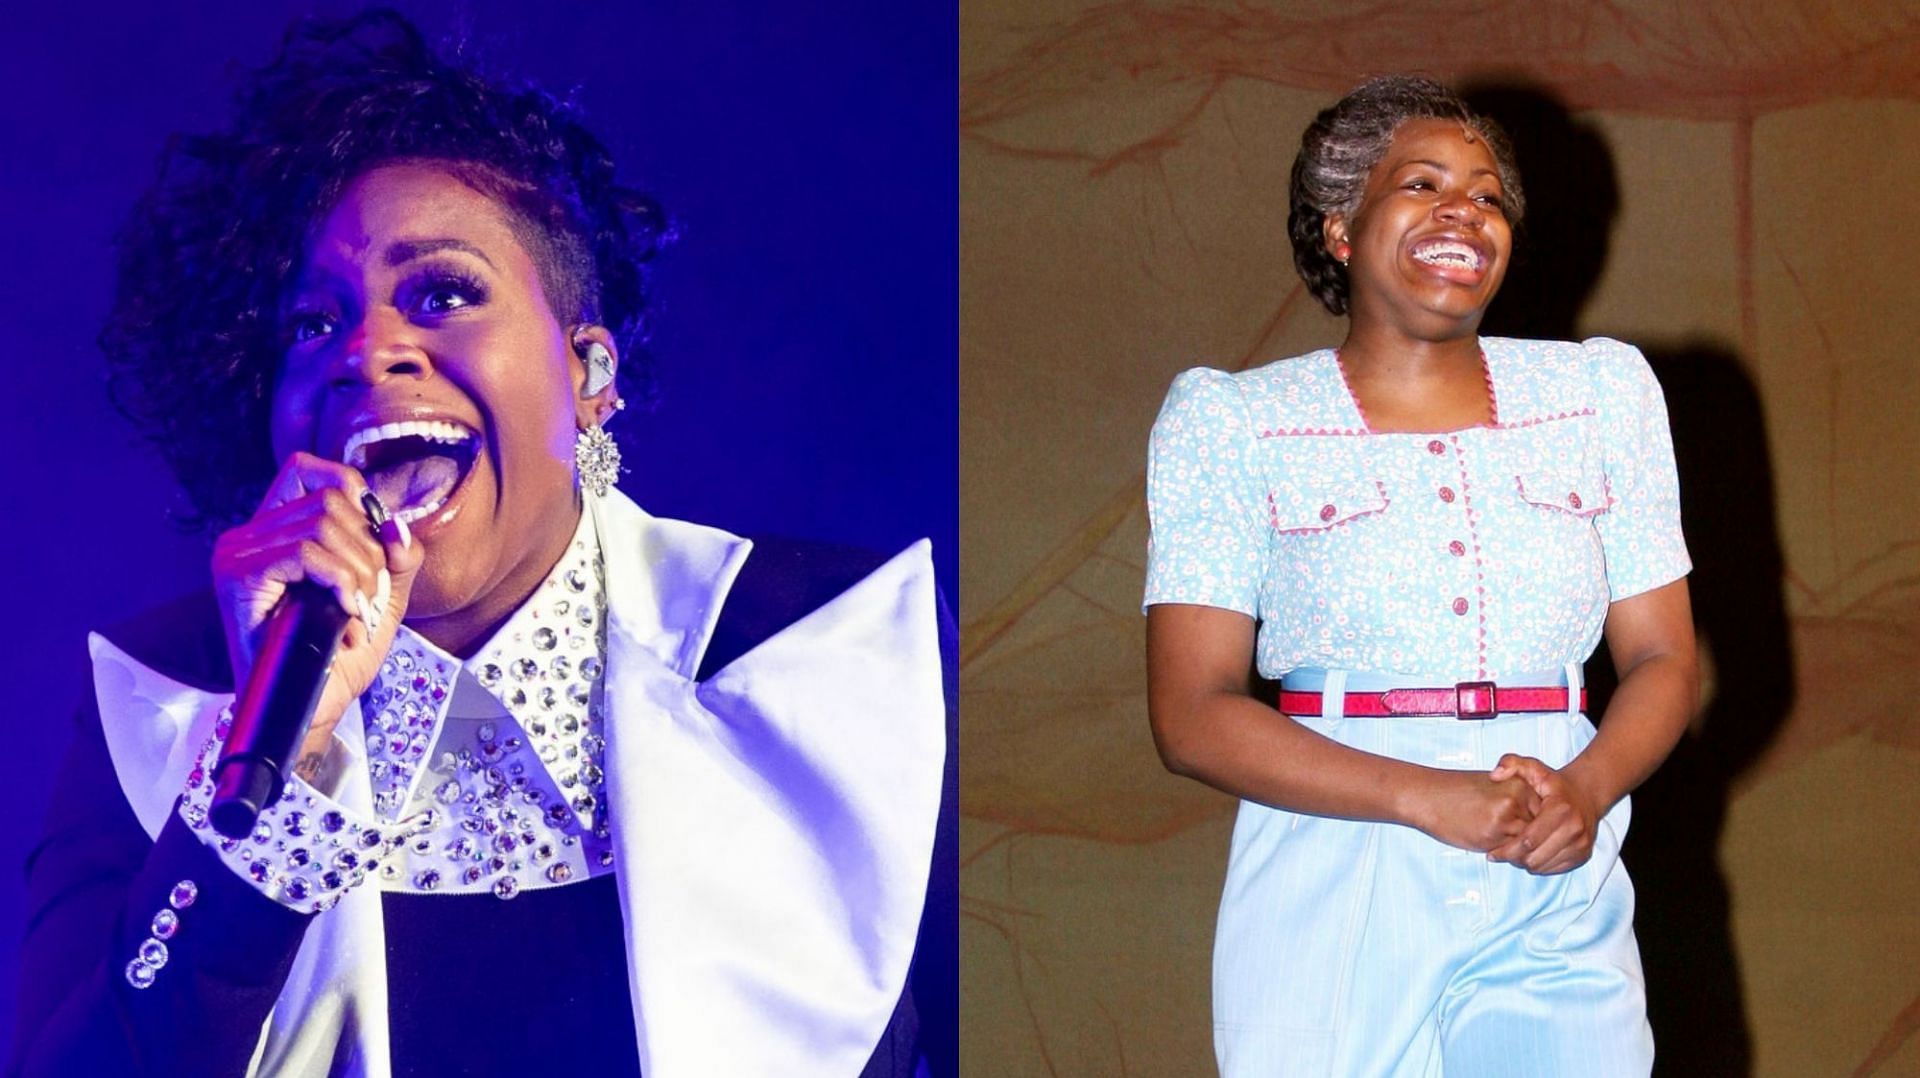 Fantasia Barrino is set to play Celie Harris in the &#039;The Color Purple&#039; movie musical (Image via Josh Brasted/Getty Images and Bruce Glikas/Getty Images)